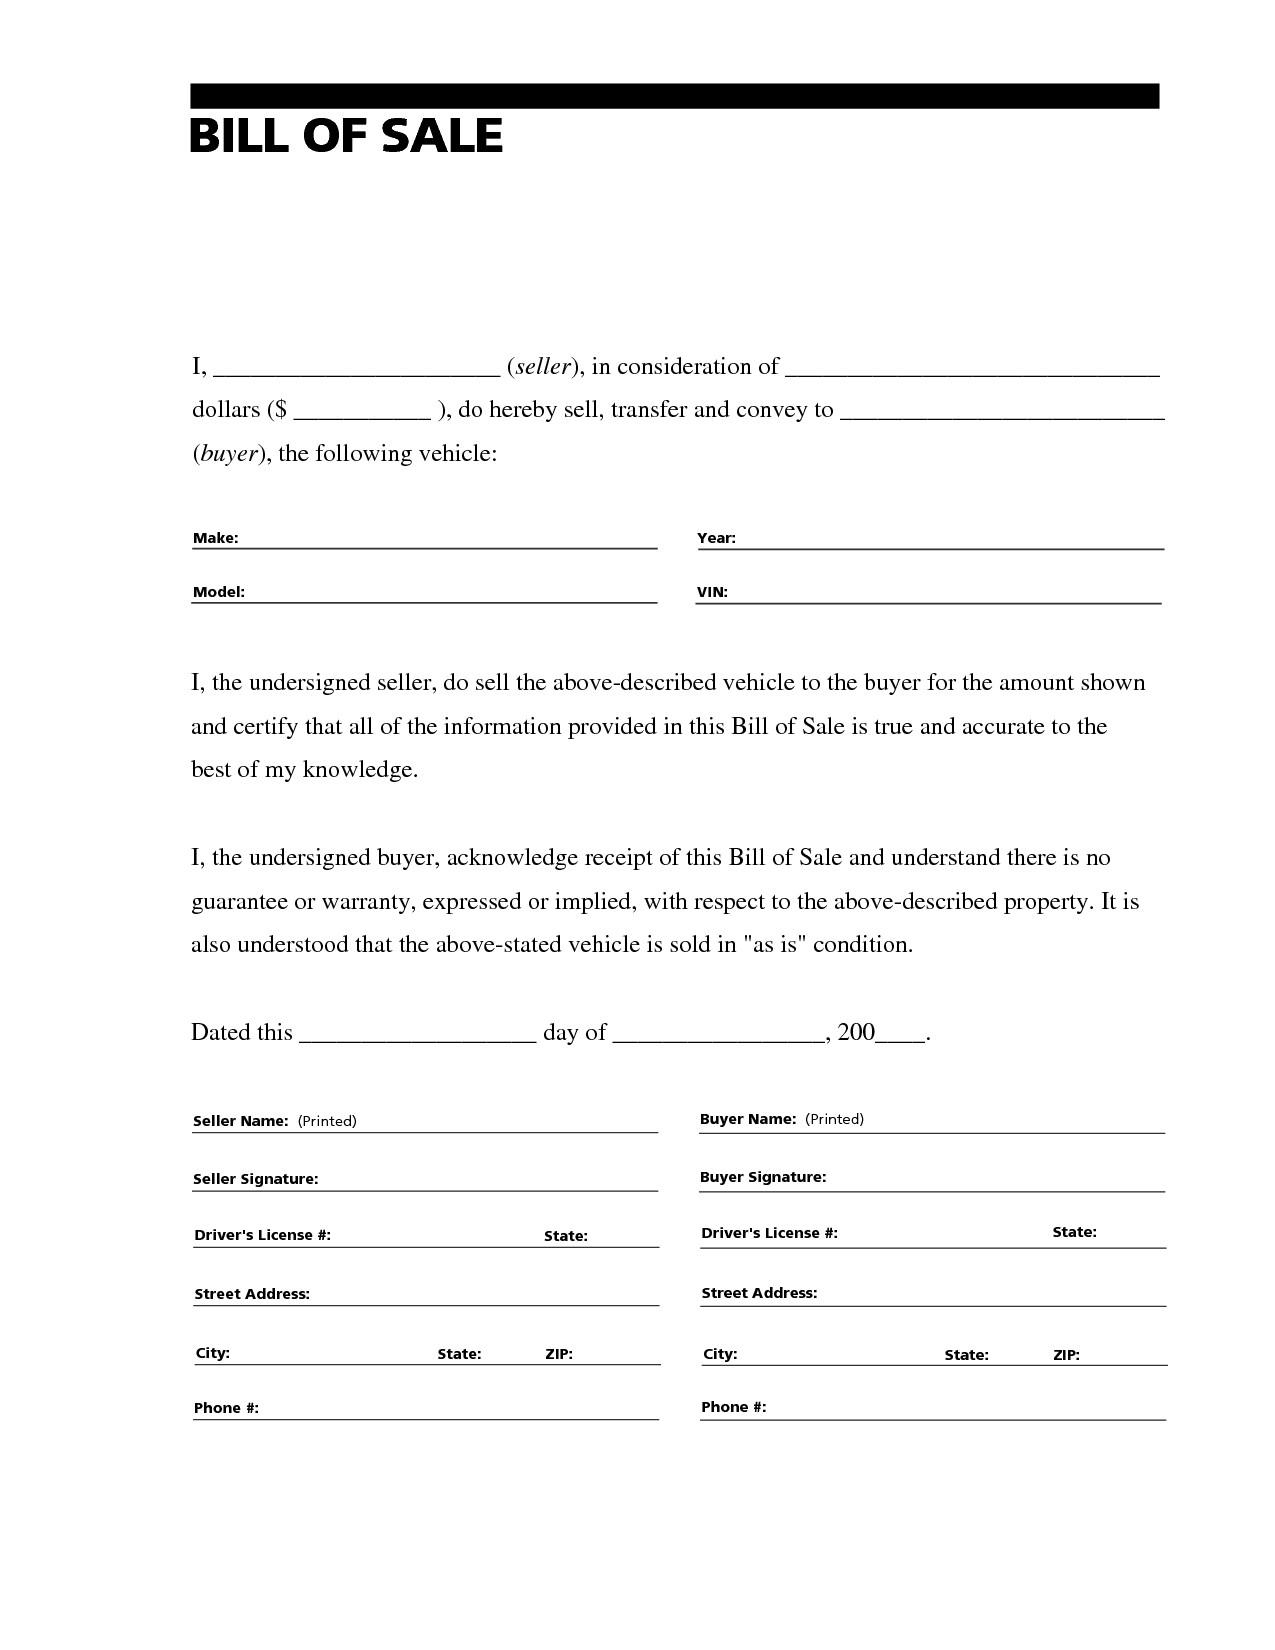 Free Printable Last Will And Testament Blank Forms Florida | Mbm Legal - Free Printable Last Will And Testament Blank Forms Florida